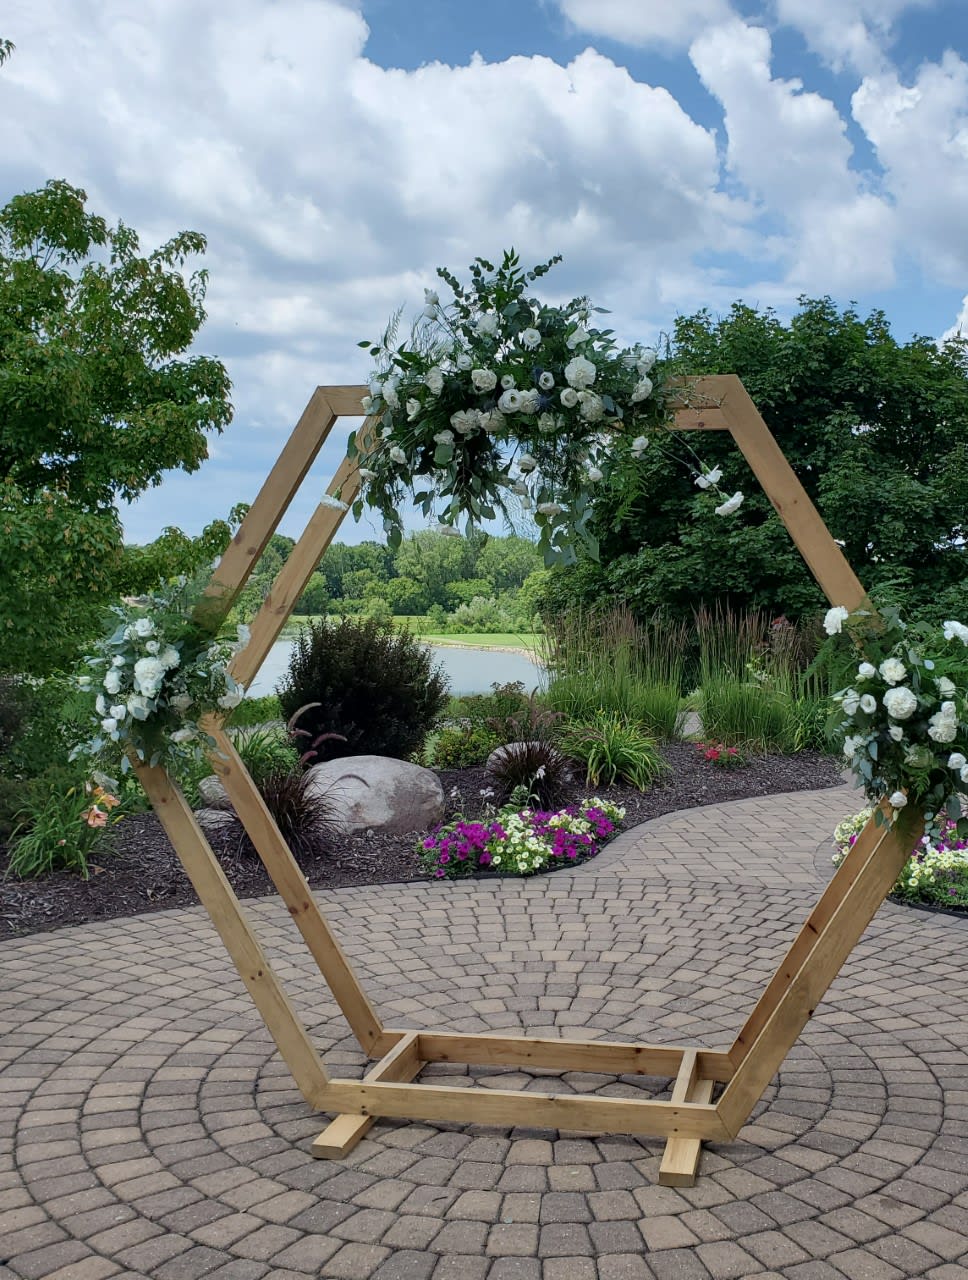 This Arch was made with a mixture of greens and white flowers